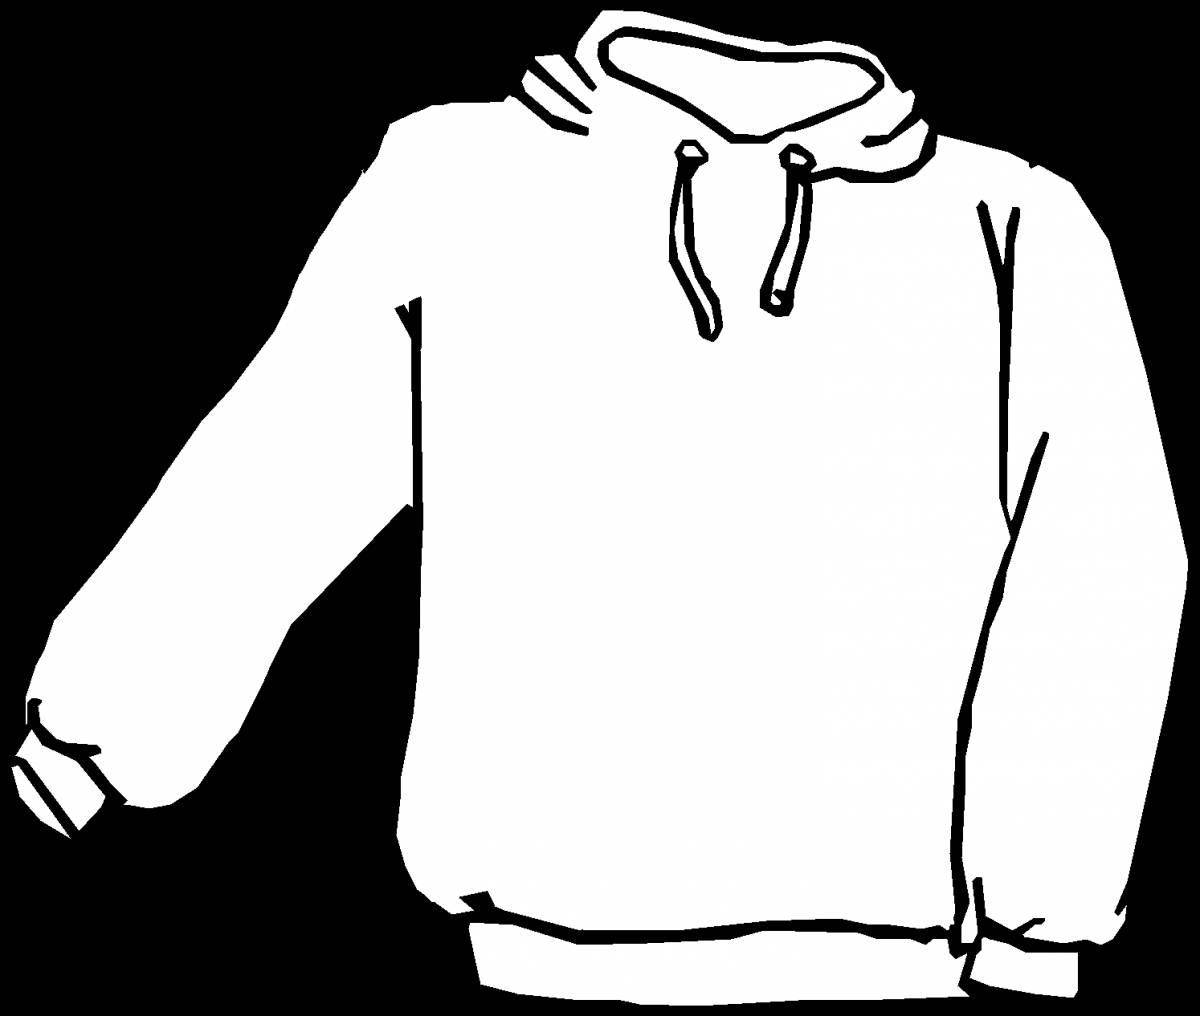 Snuggly sweater coloring page